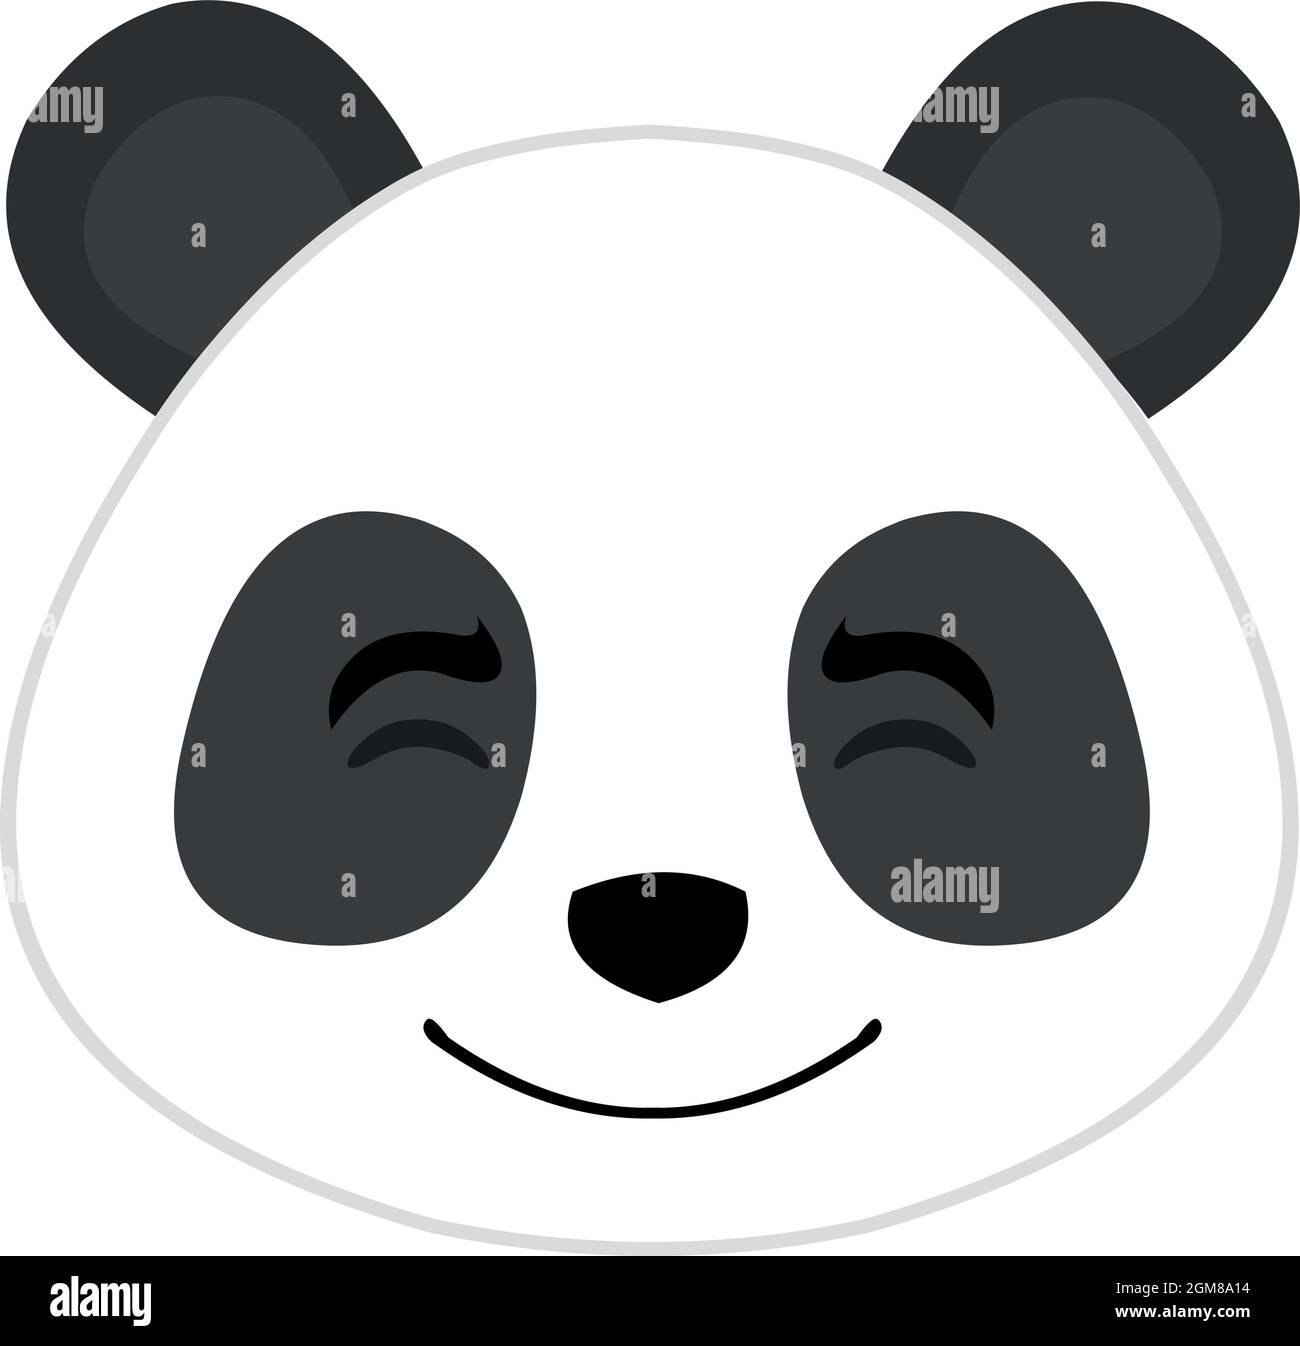 Vector emoticon illustration of the face of a cartoon panda bear with a happy expression Stock Vector